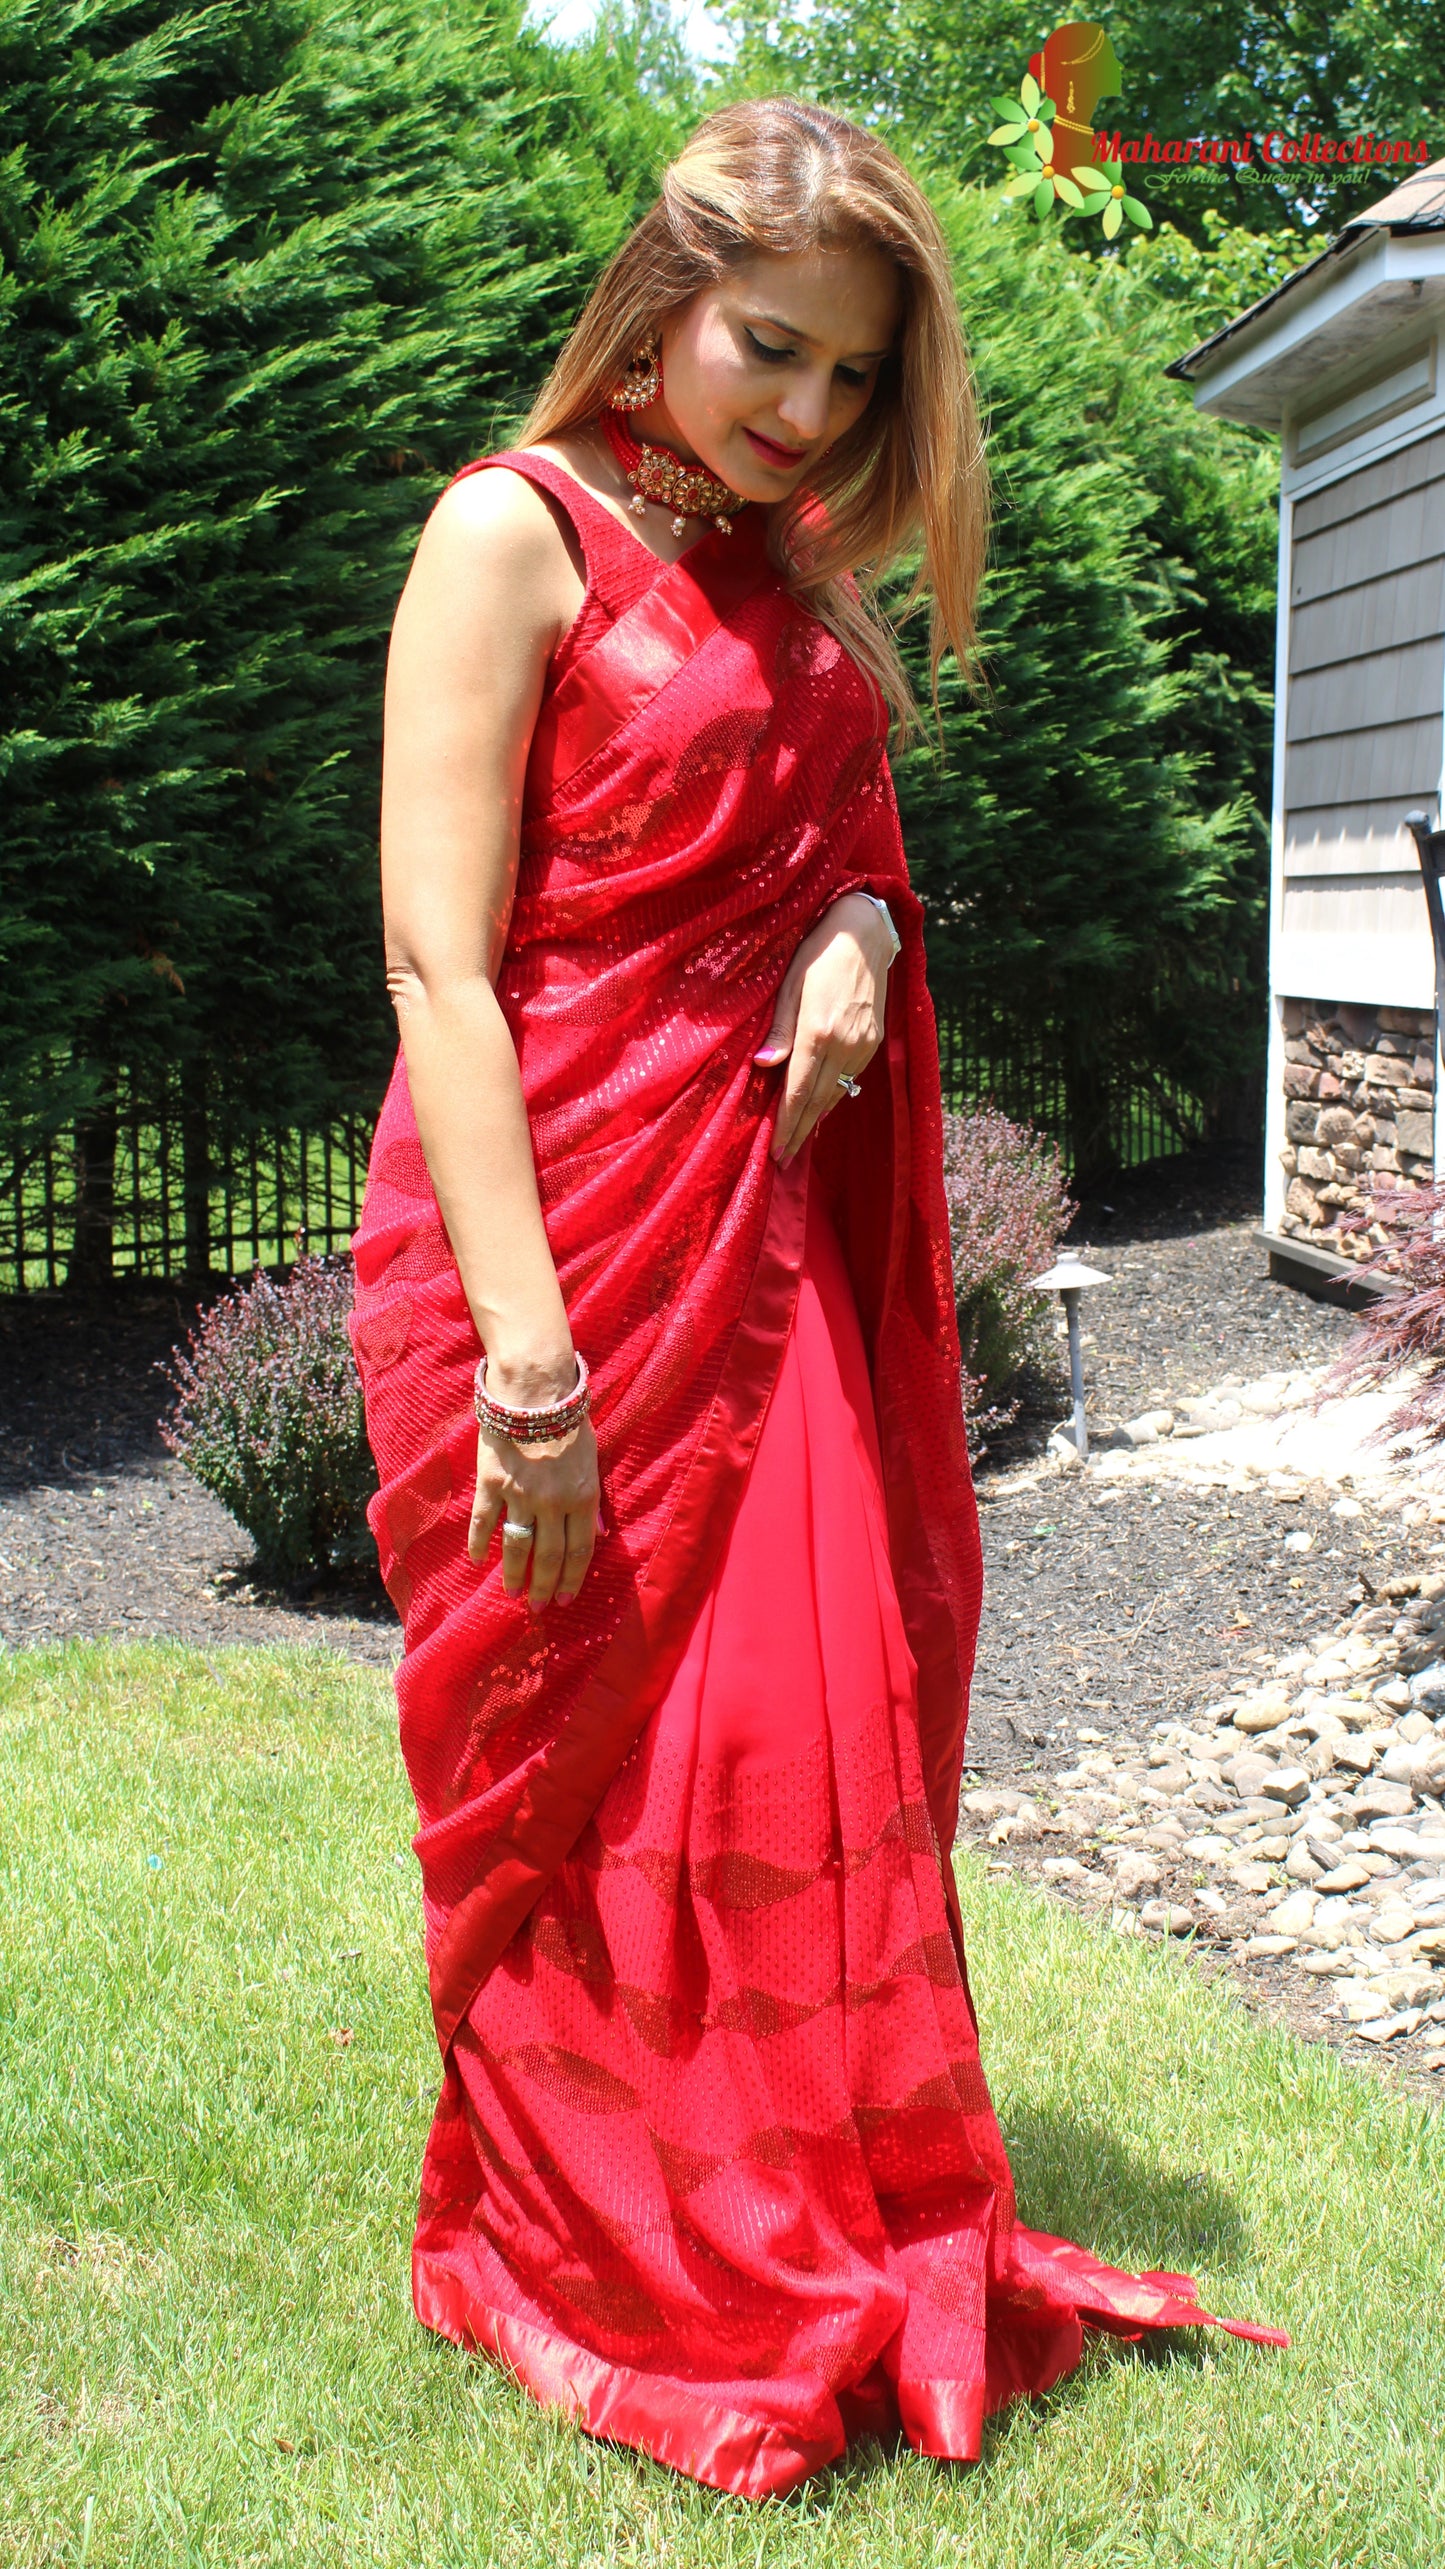 Maharani's Party Wear Georgette Sequins Saree - Bridal Red (with Stitched Blouse and Petticoat)